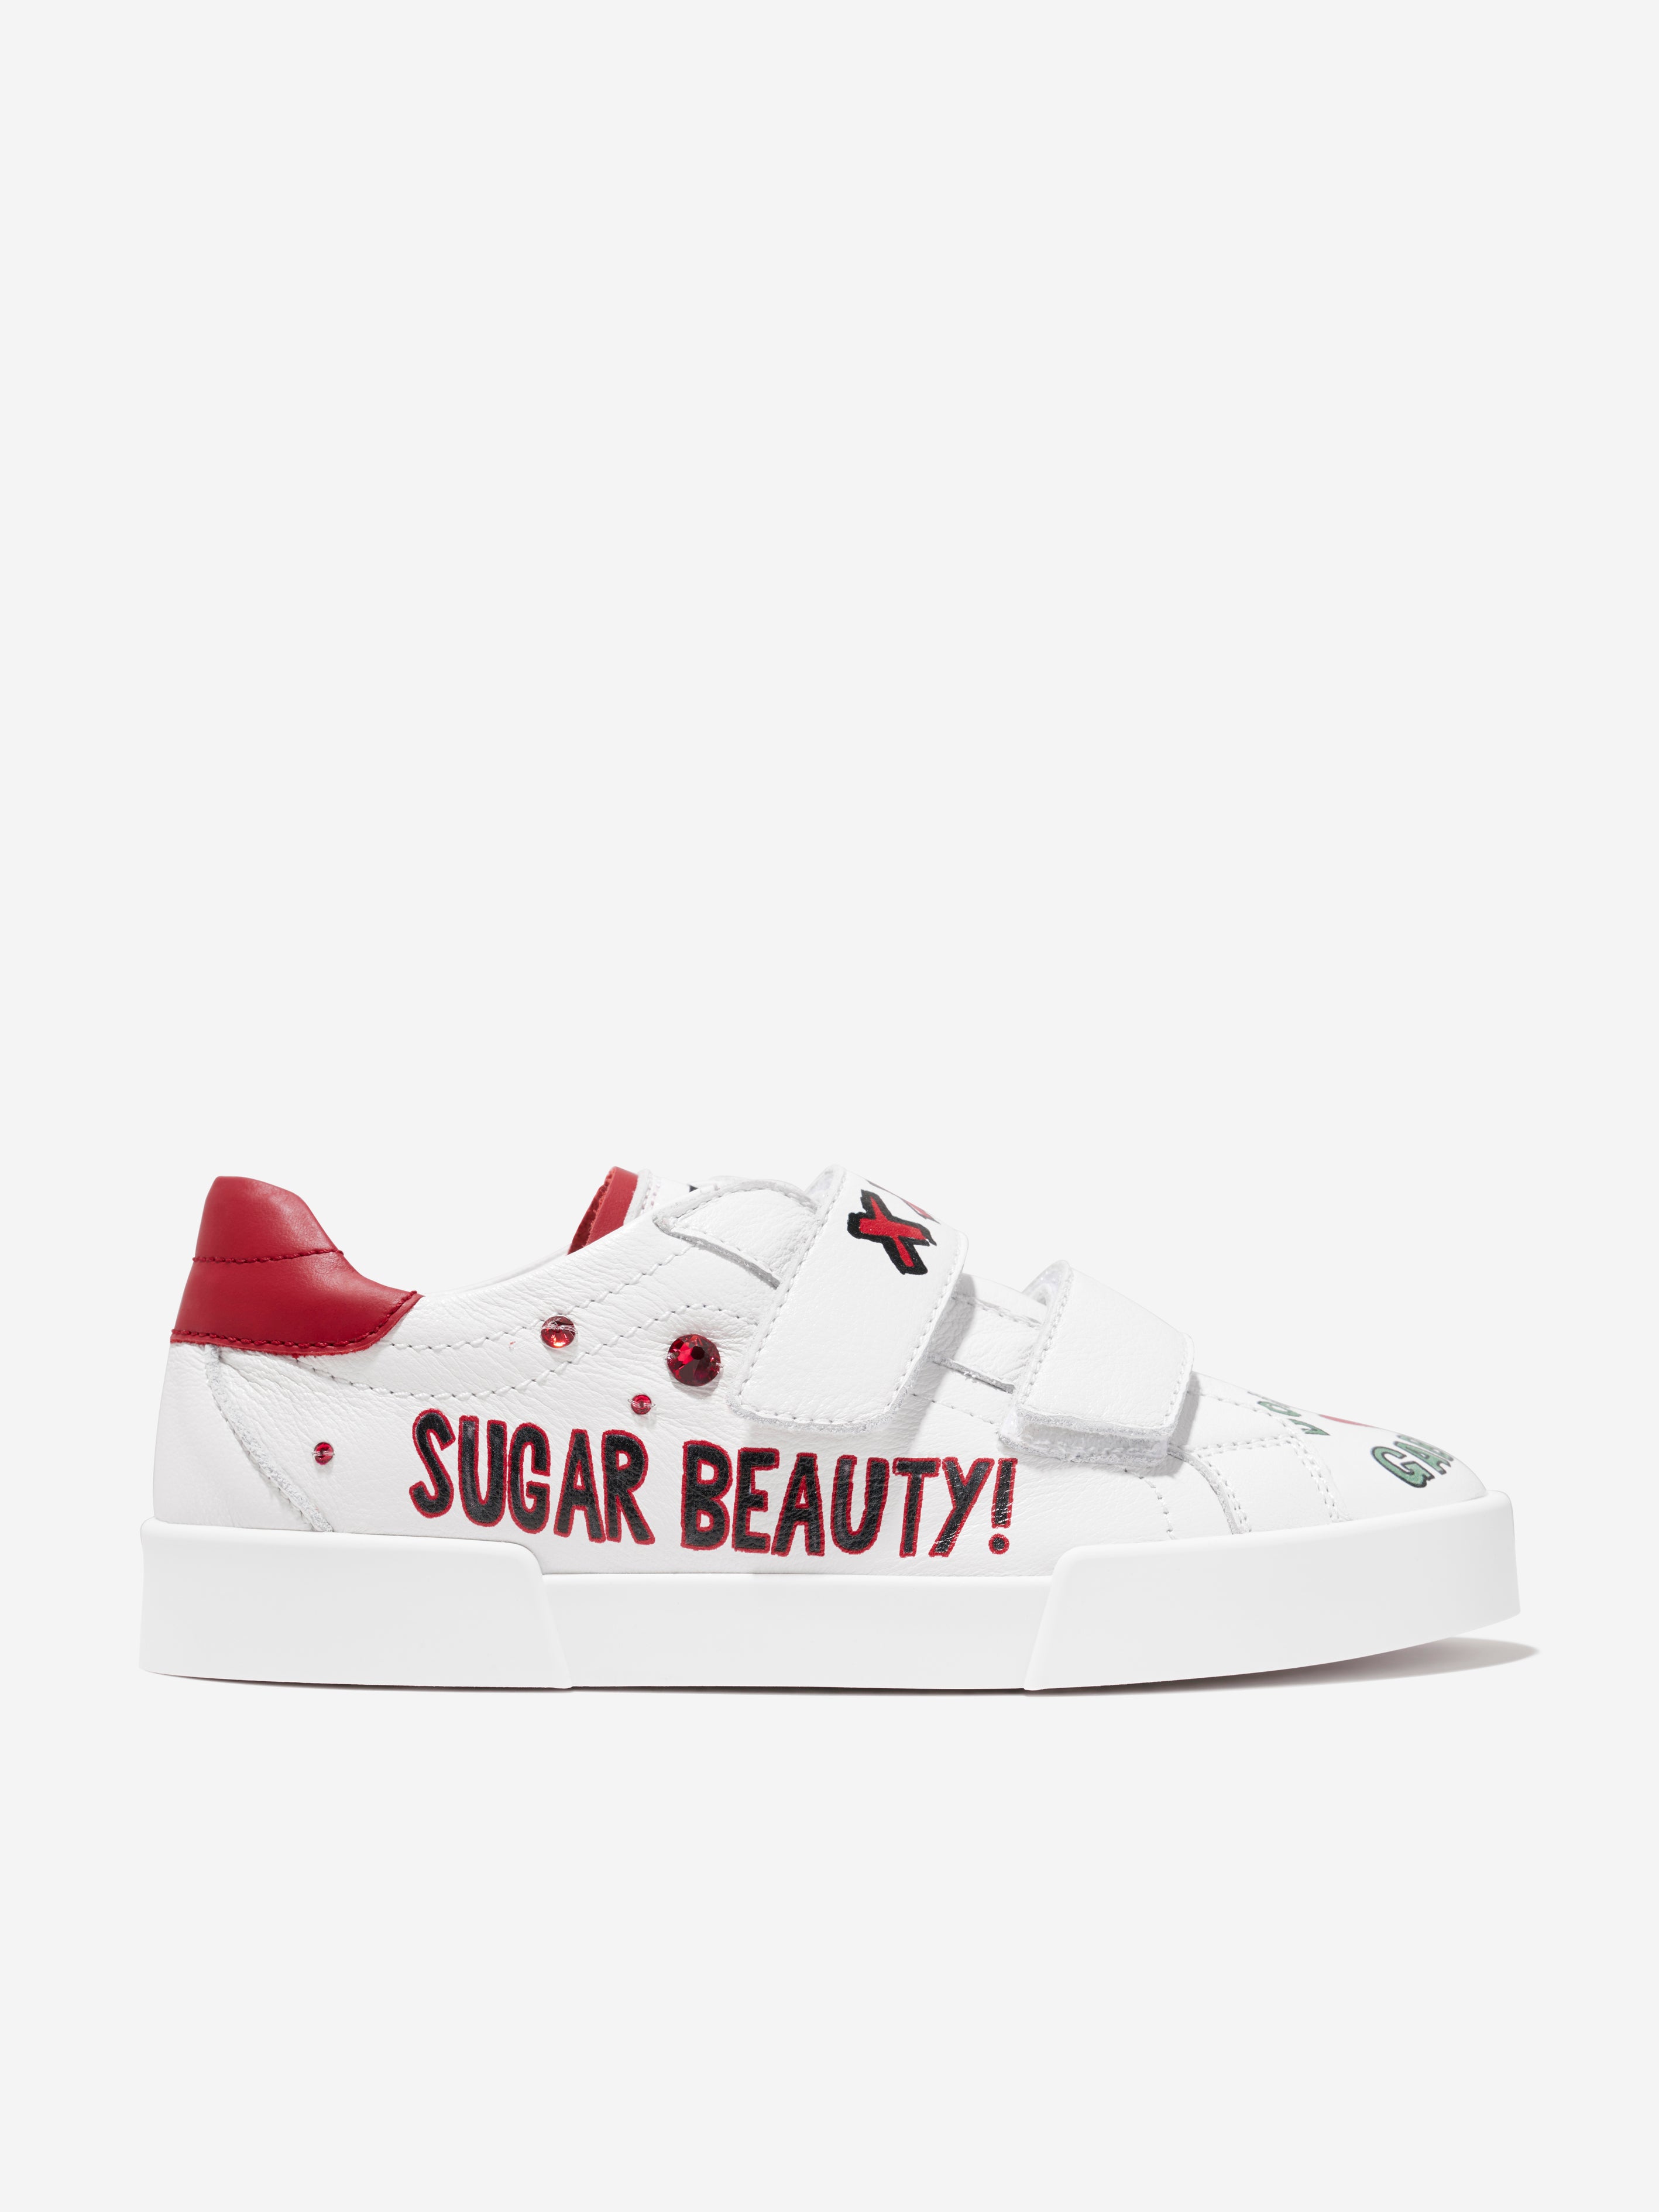 Dolce and Gabbana White/Pink Leather Logo Velcro Straps Sneakers